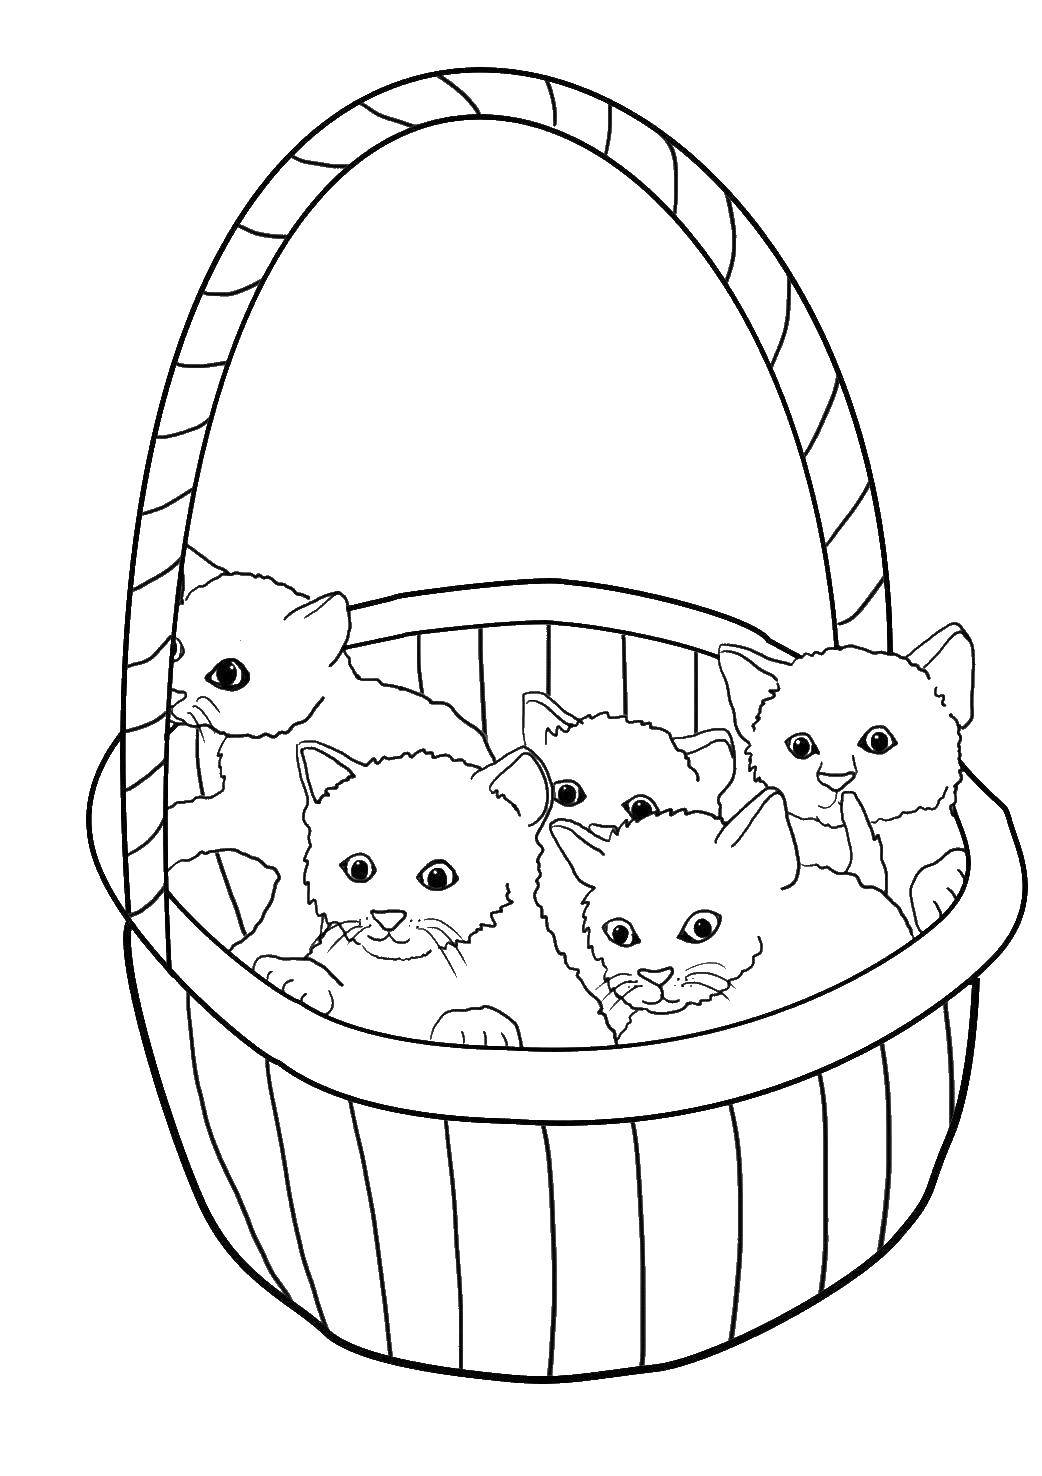 Coloring Basket of kittens. Category Cats and kittens. Tags:  Animals, kittens, basket.